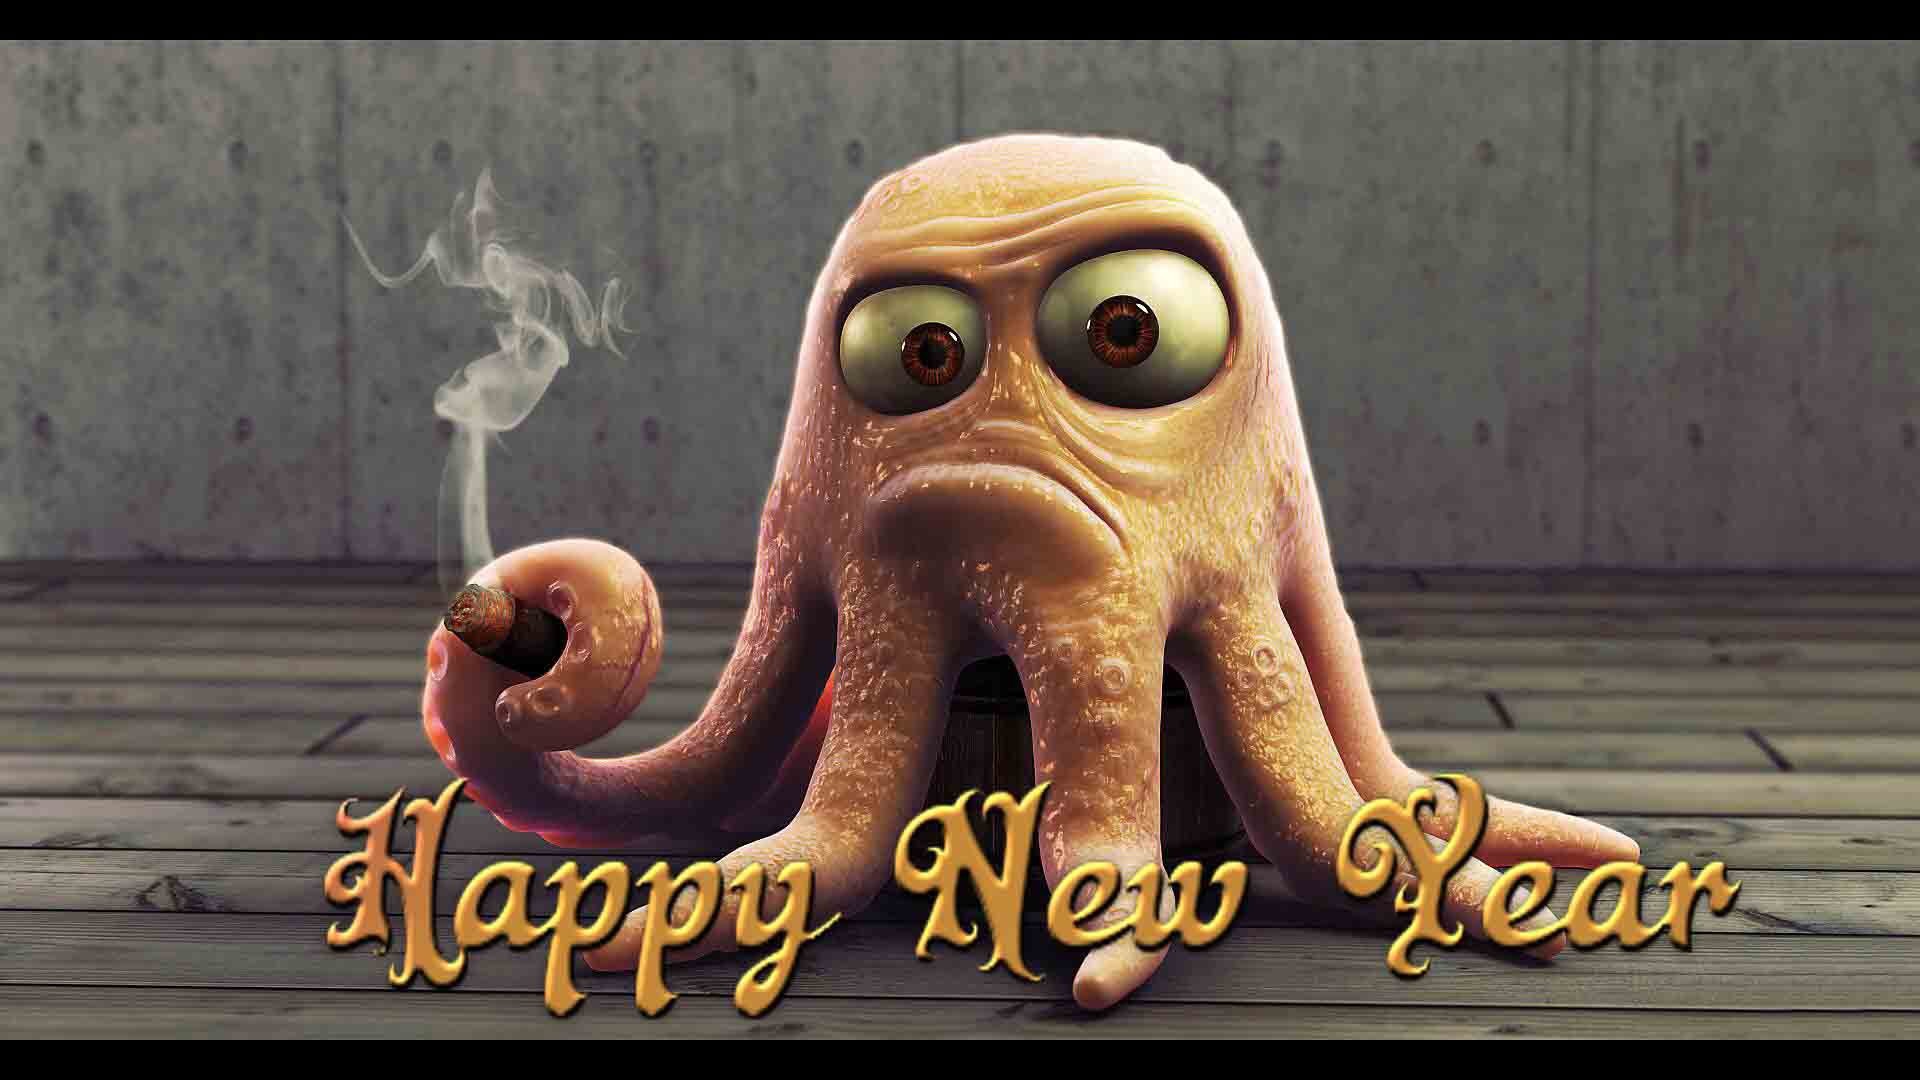 1920x1080 Free funny happy new year hd wallpapers computer download